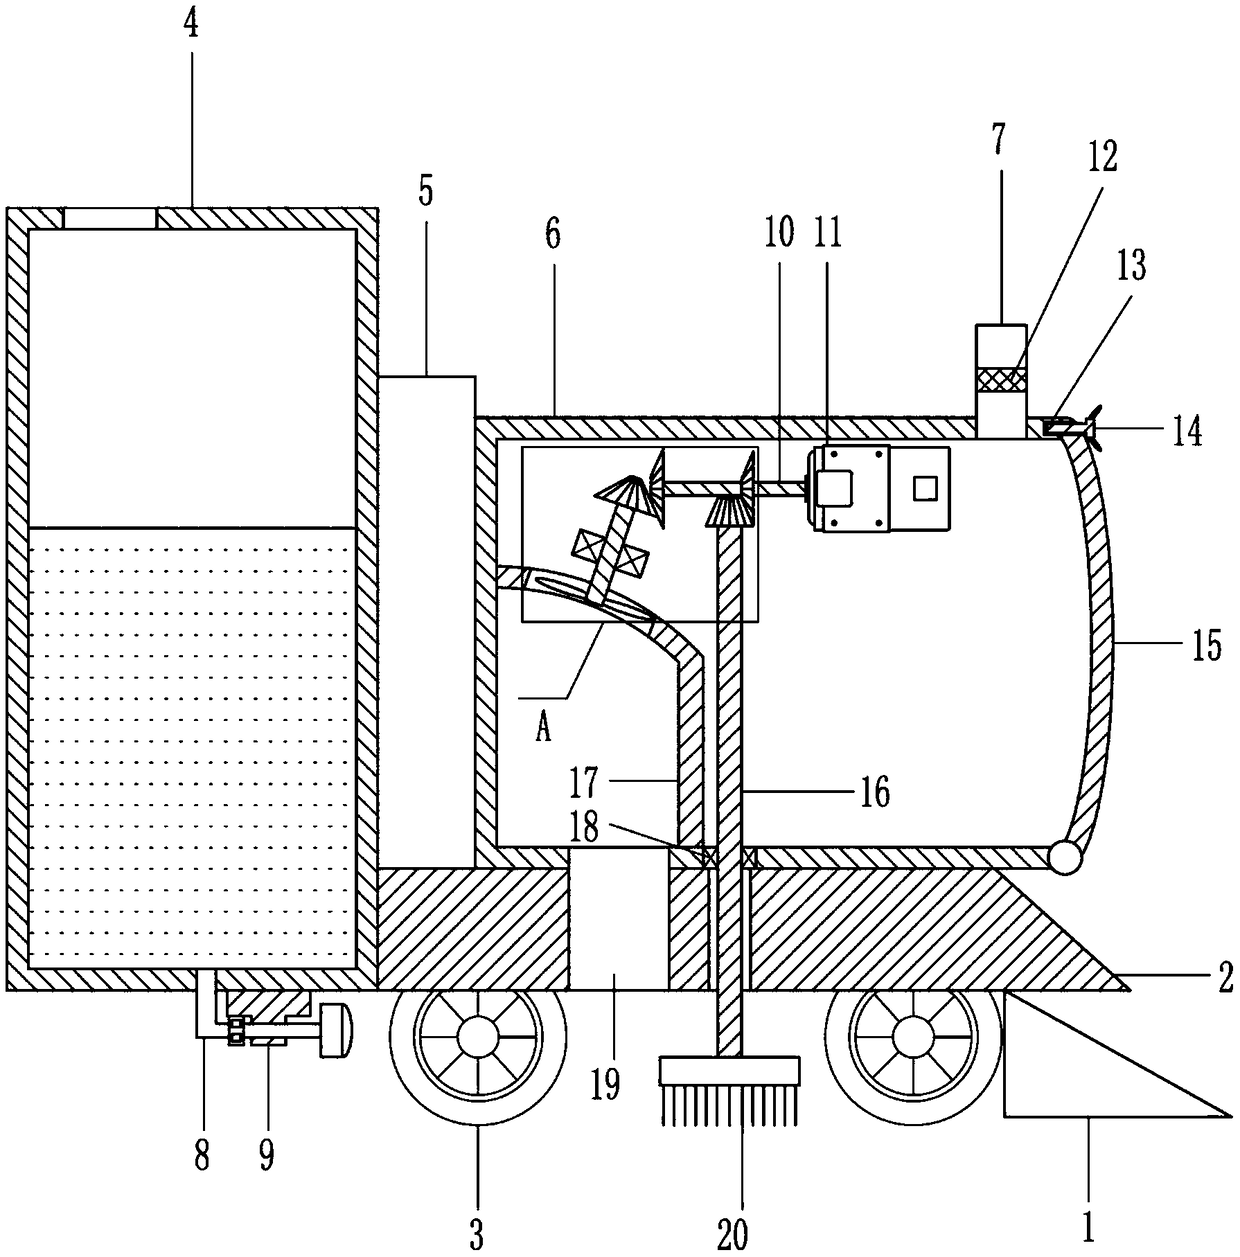 Self-propelled bridge surface cleaning vehicle